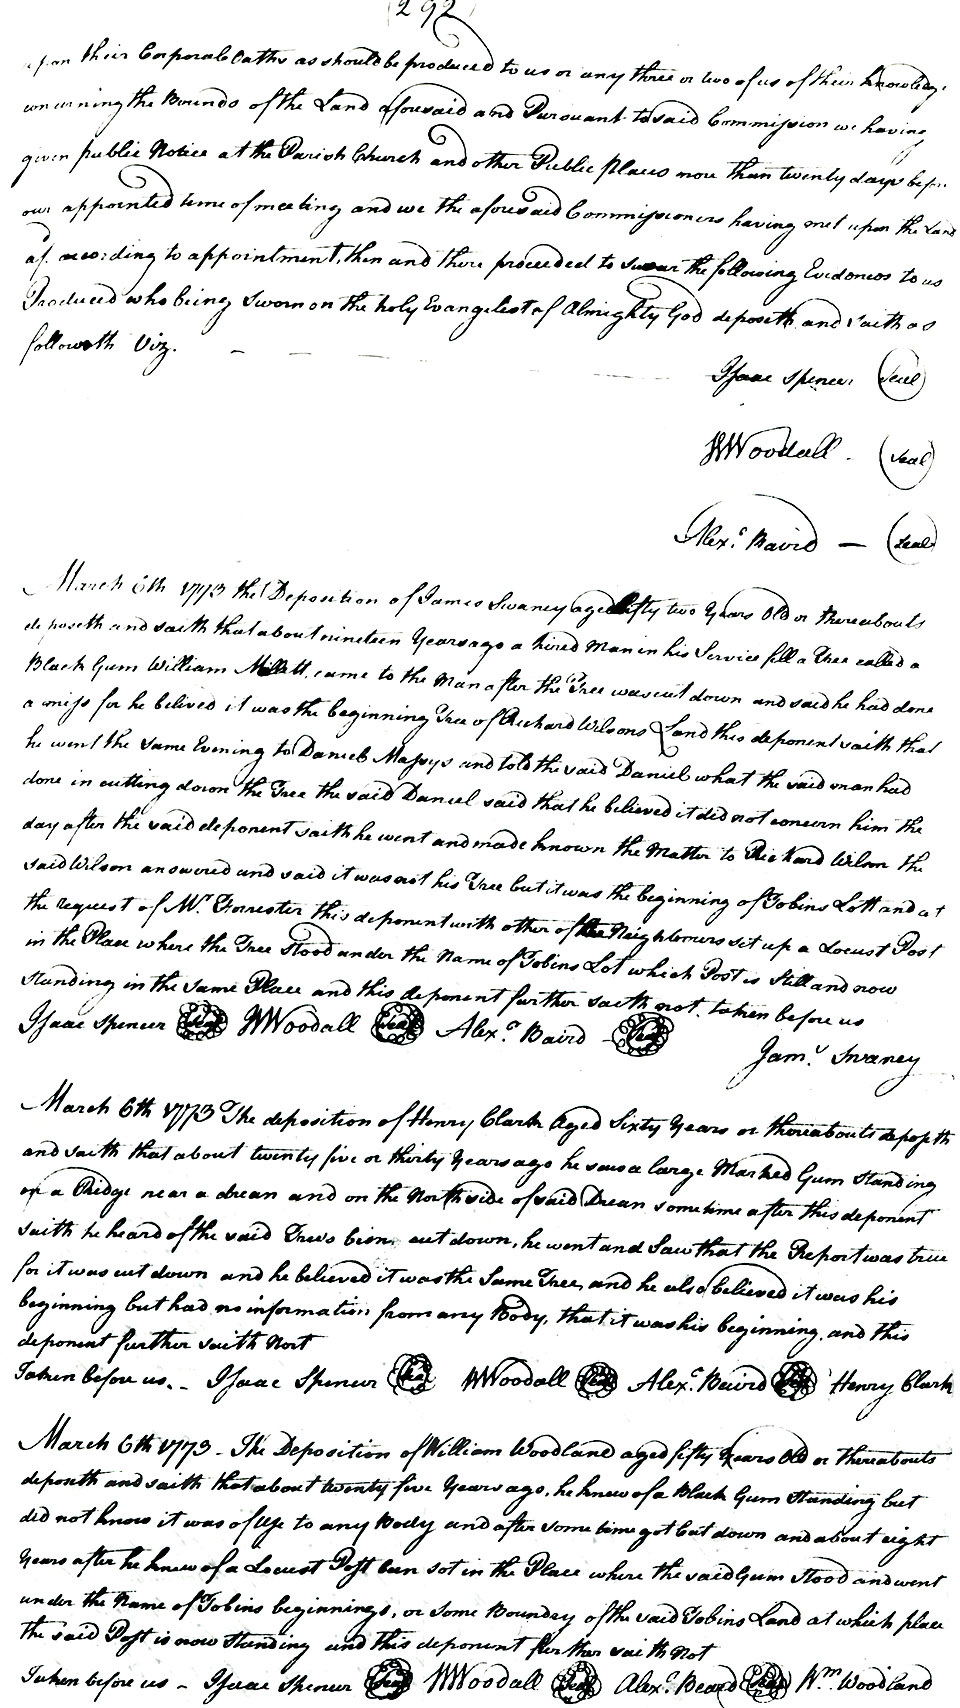 Maryland Land Records, Kent County, Daniel Massey petition, March 28, 1773